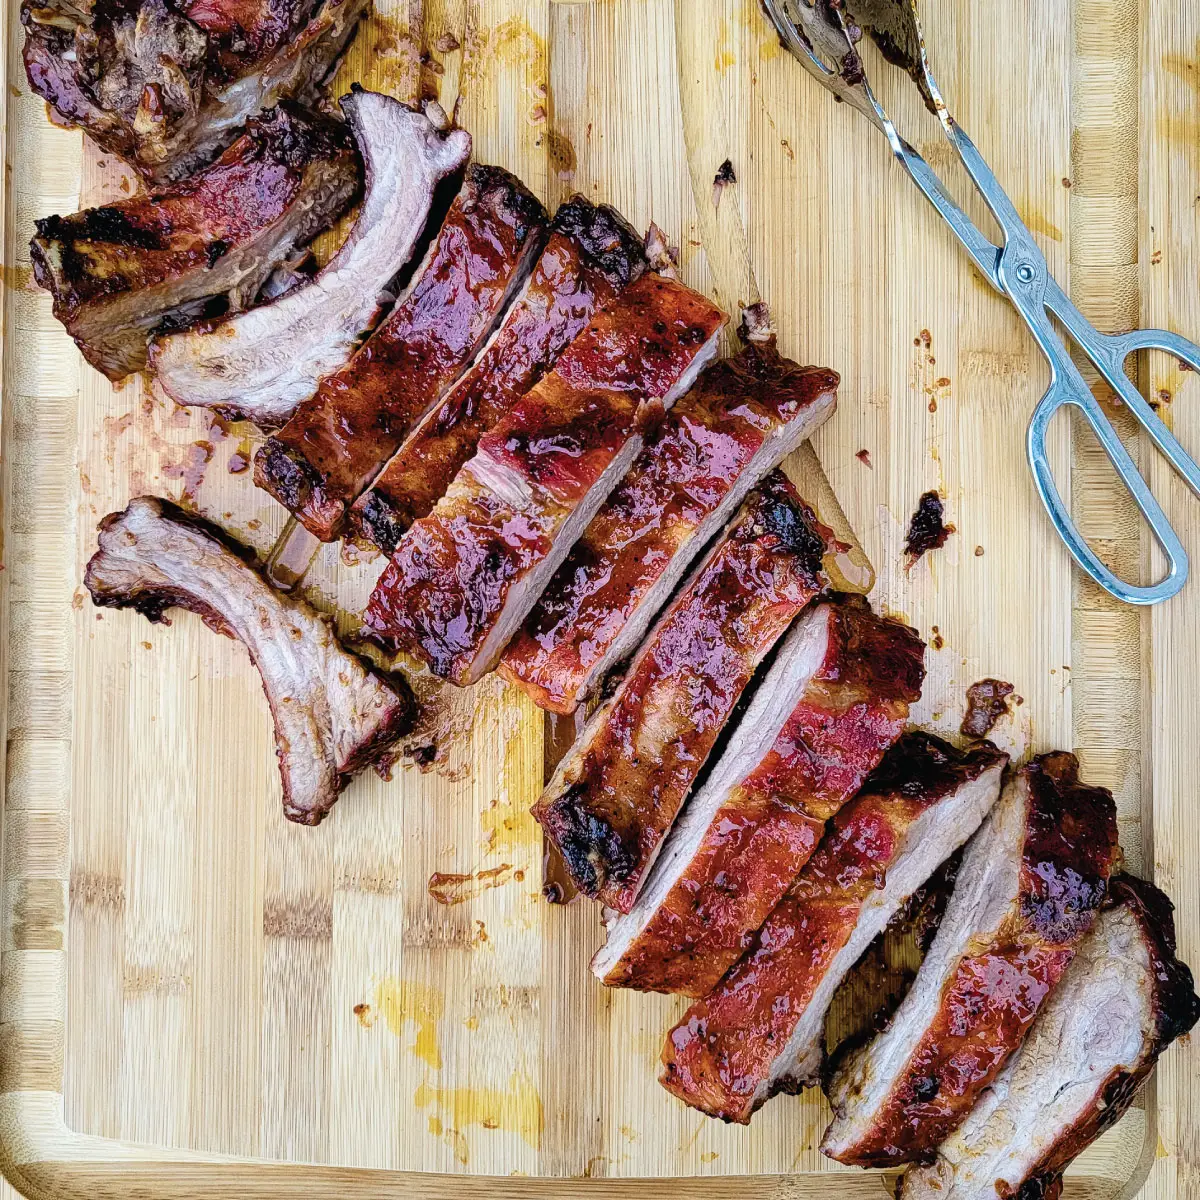 Ribs on a cutting board after being cut to be served.